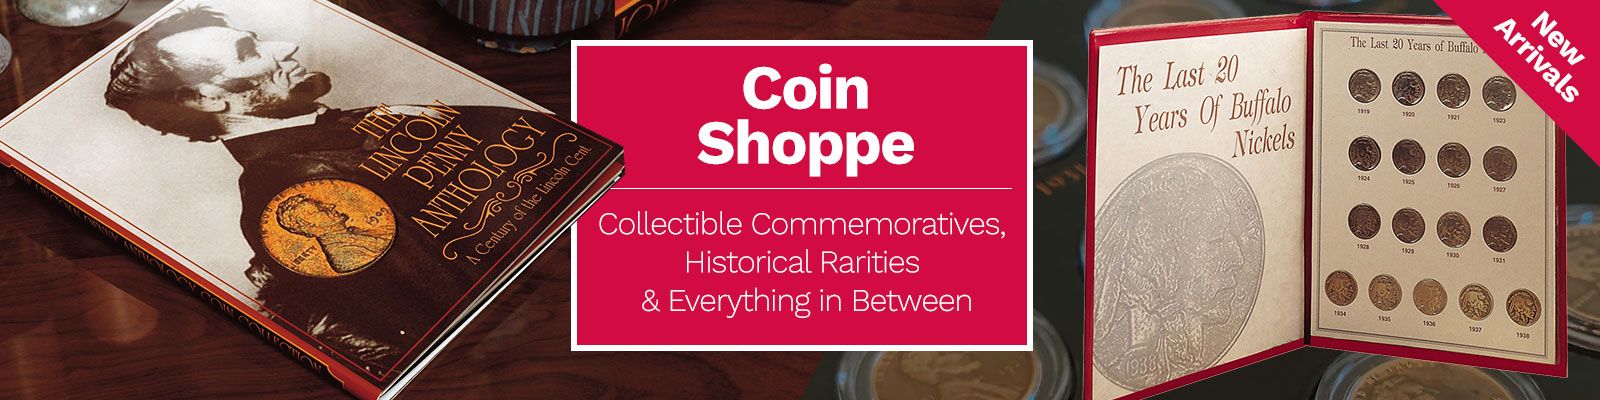 Coin Shoppe  Collectible Commemoratives, Historical Rarities & Everything in Between   New Arrivals ft. 523-791, 523-822